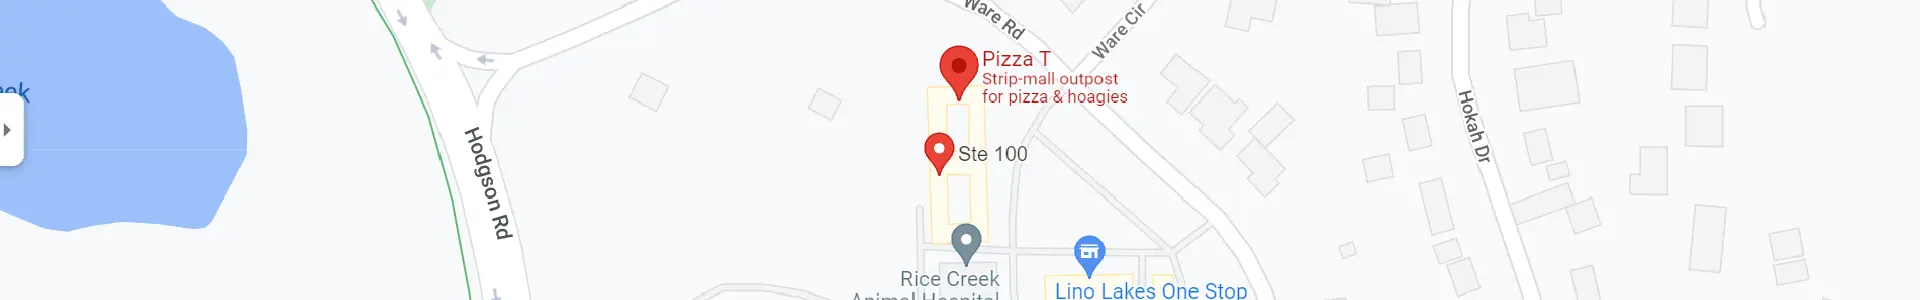 A map of the location of pizza t.